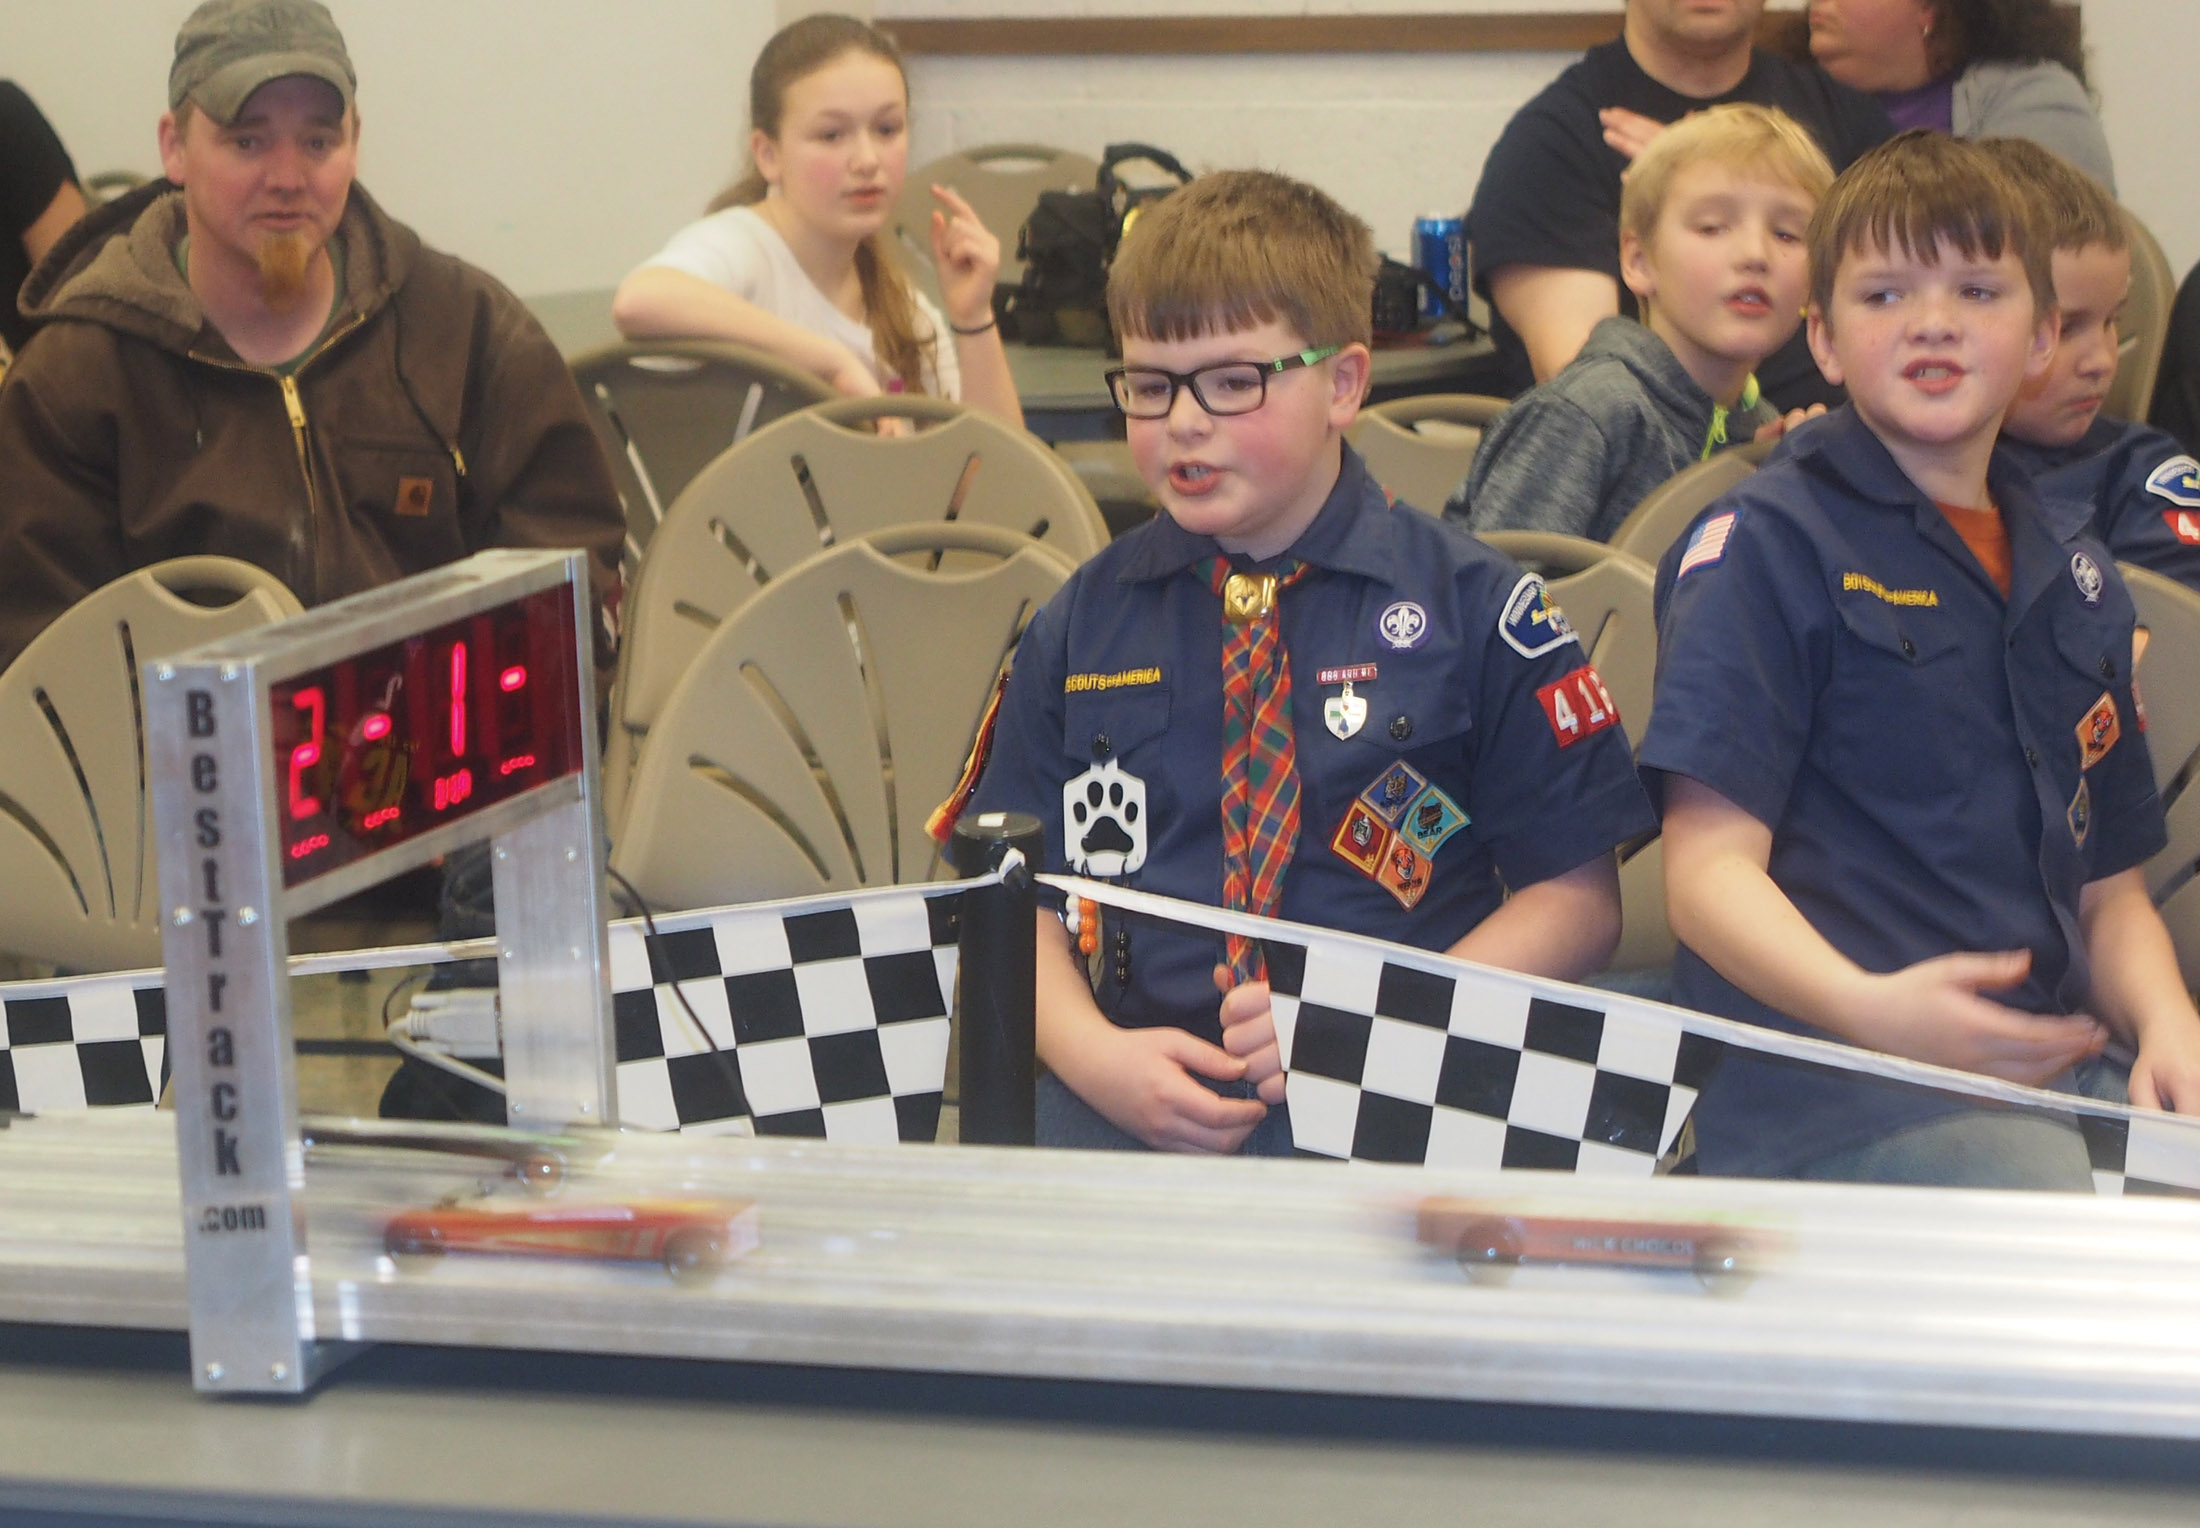 Pinewood Derby contestants are Fast and Serious